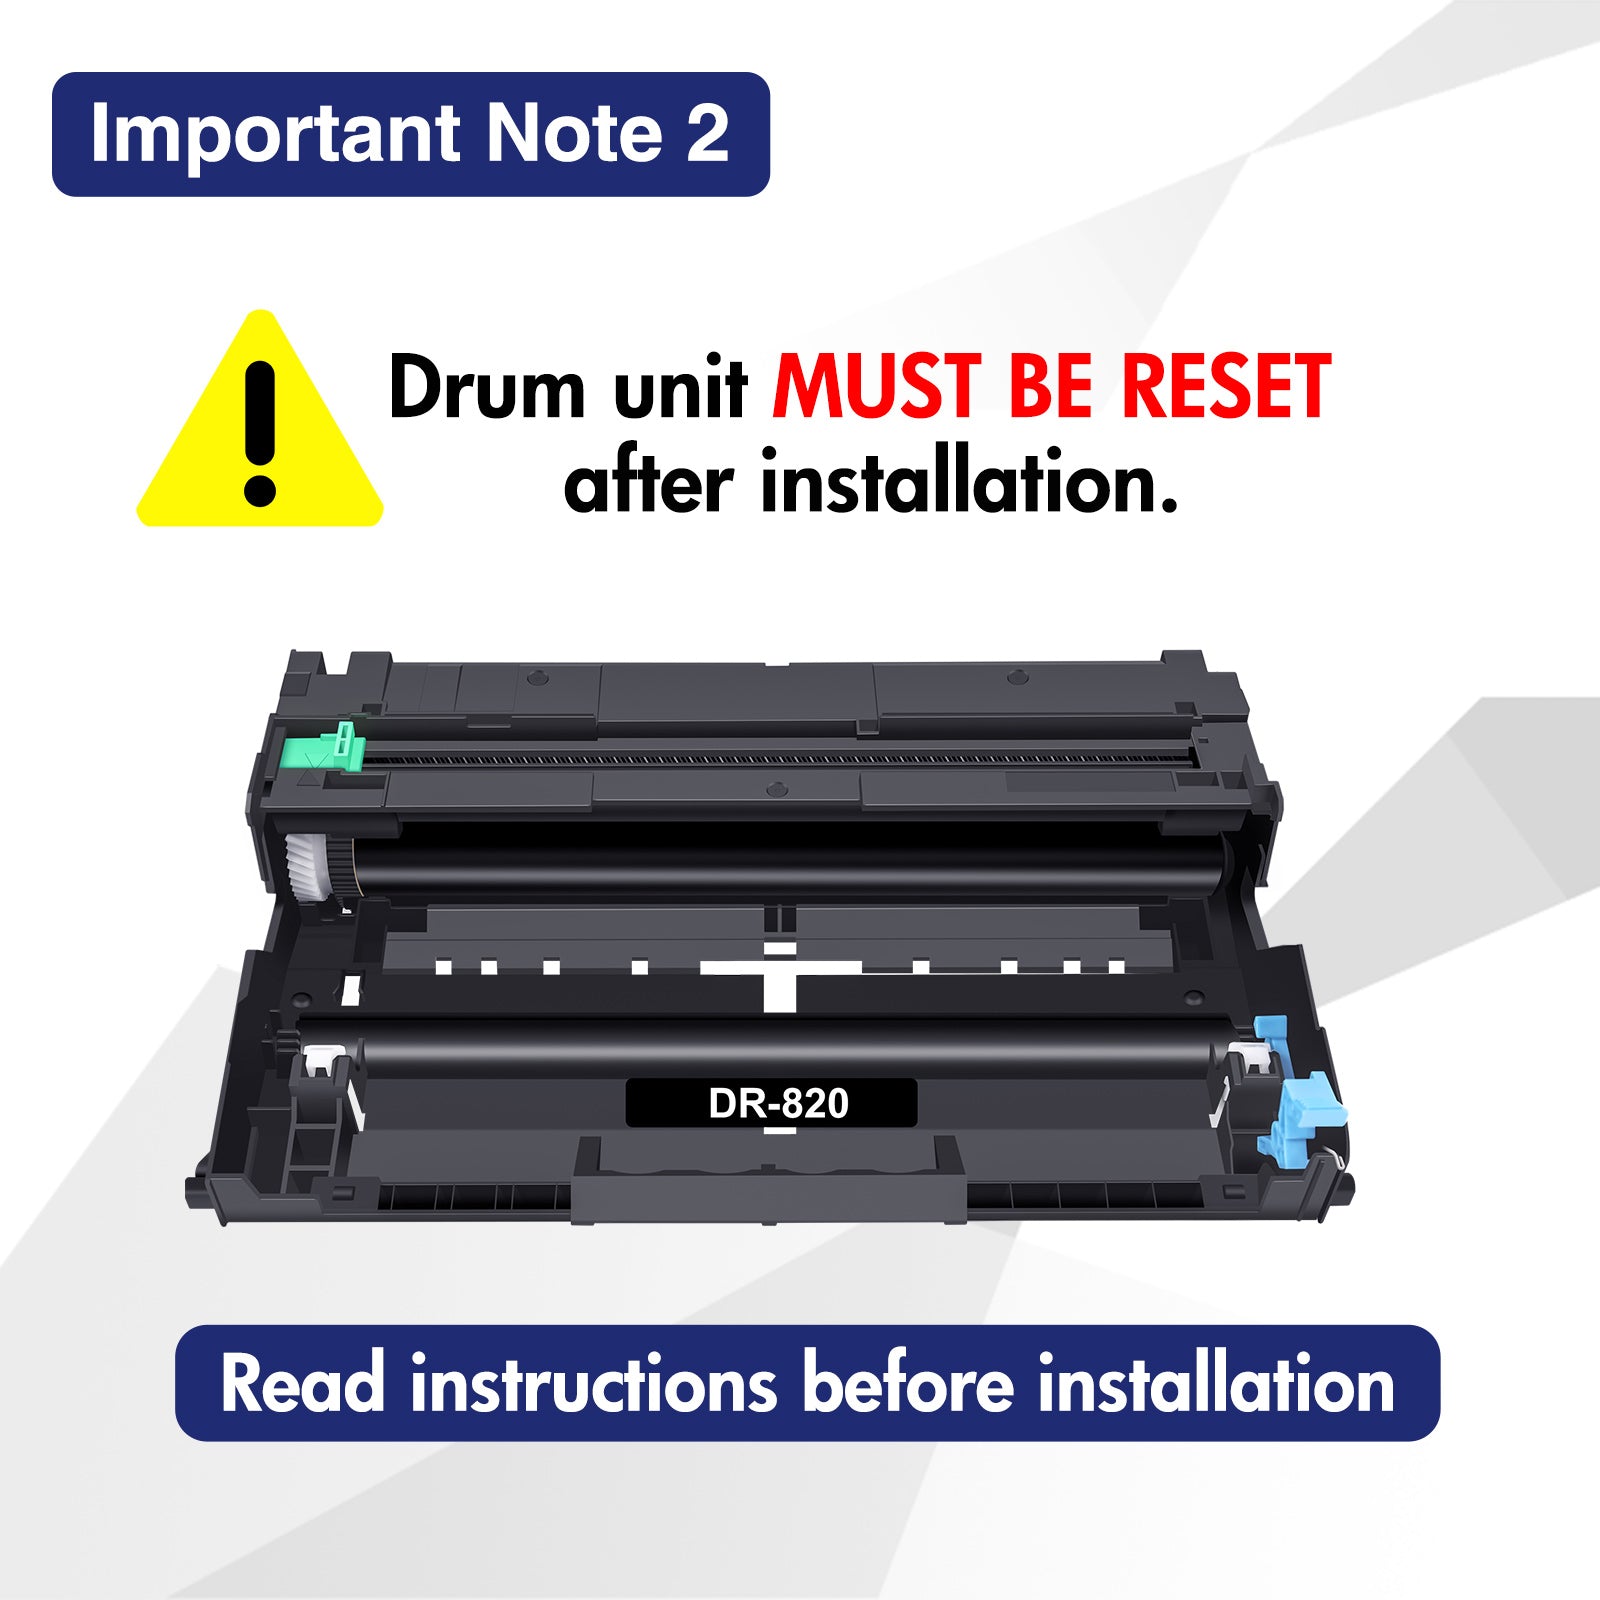 Amstech 1-Pack Compatible Drum Unit for Brother DR-820 DR820 DR 820 HL-L5000D L5200DW L6400DW MFC-L5700DW L5850DW L6700DW L6800DW DCP-L5500DN Printer(Black)